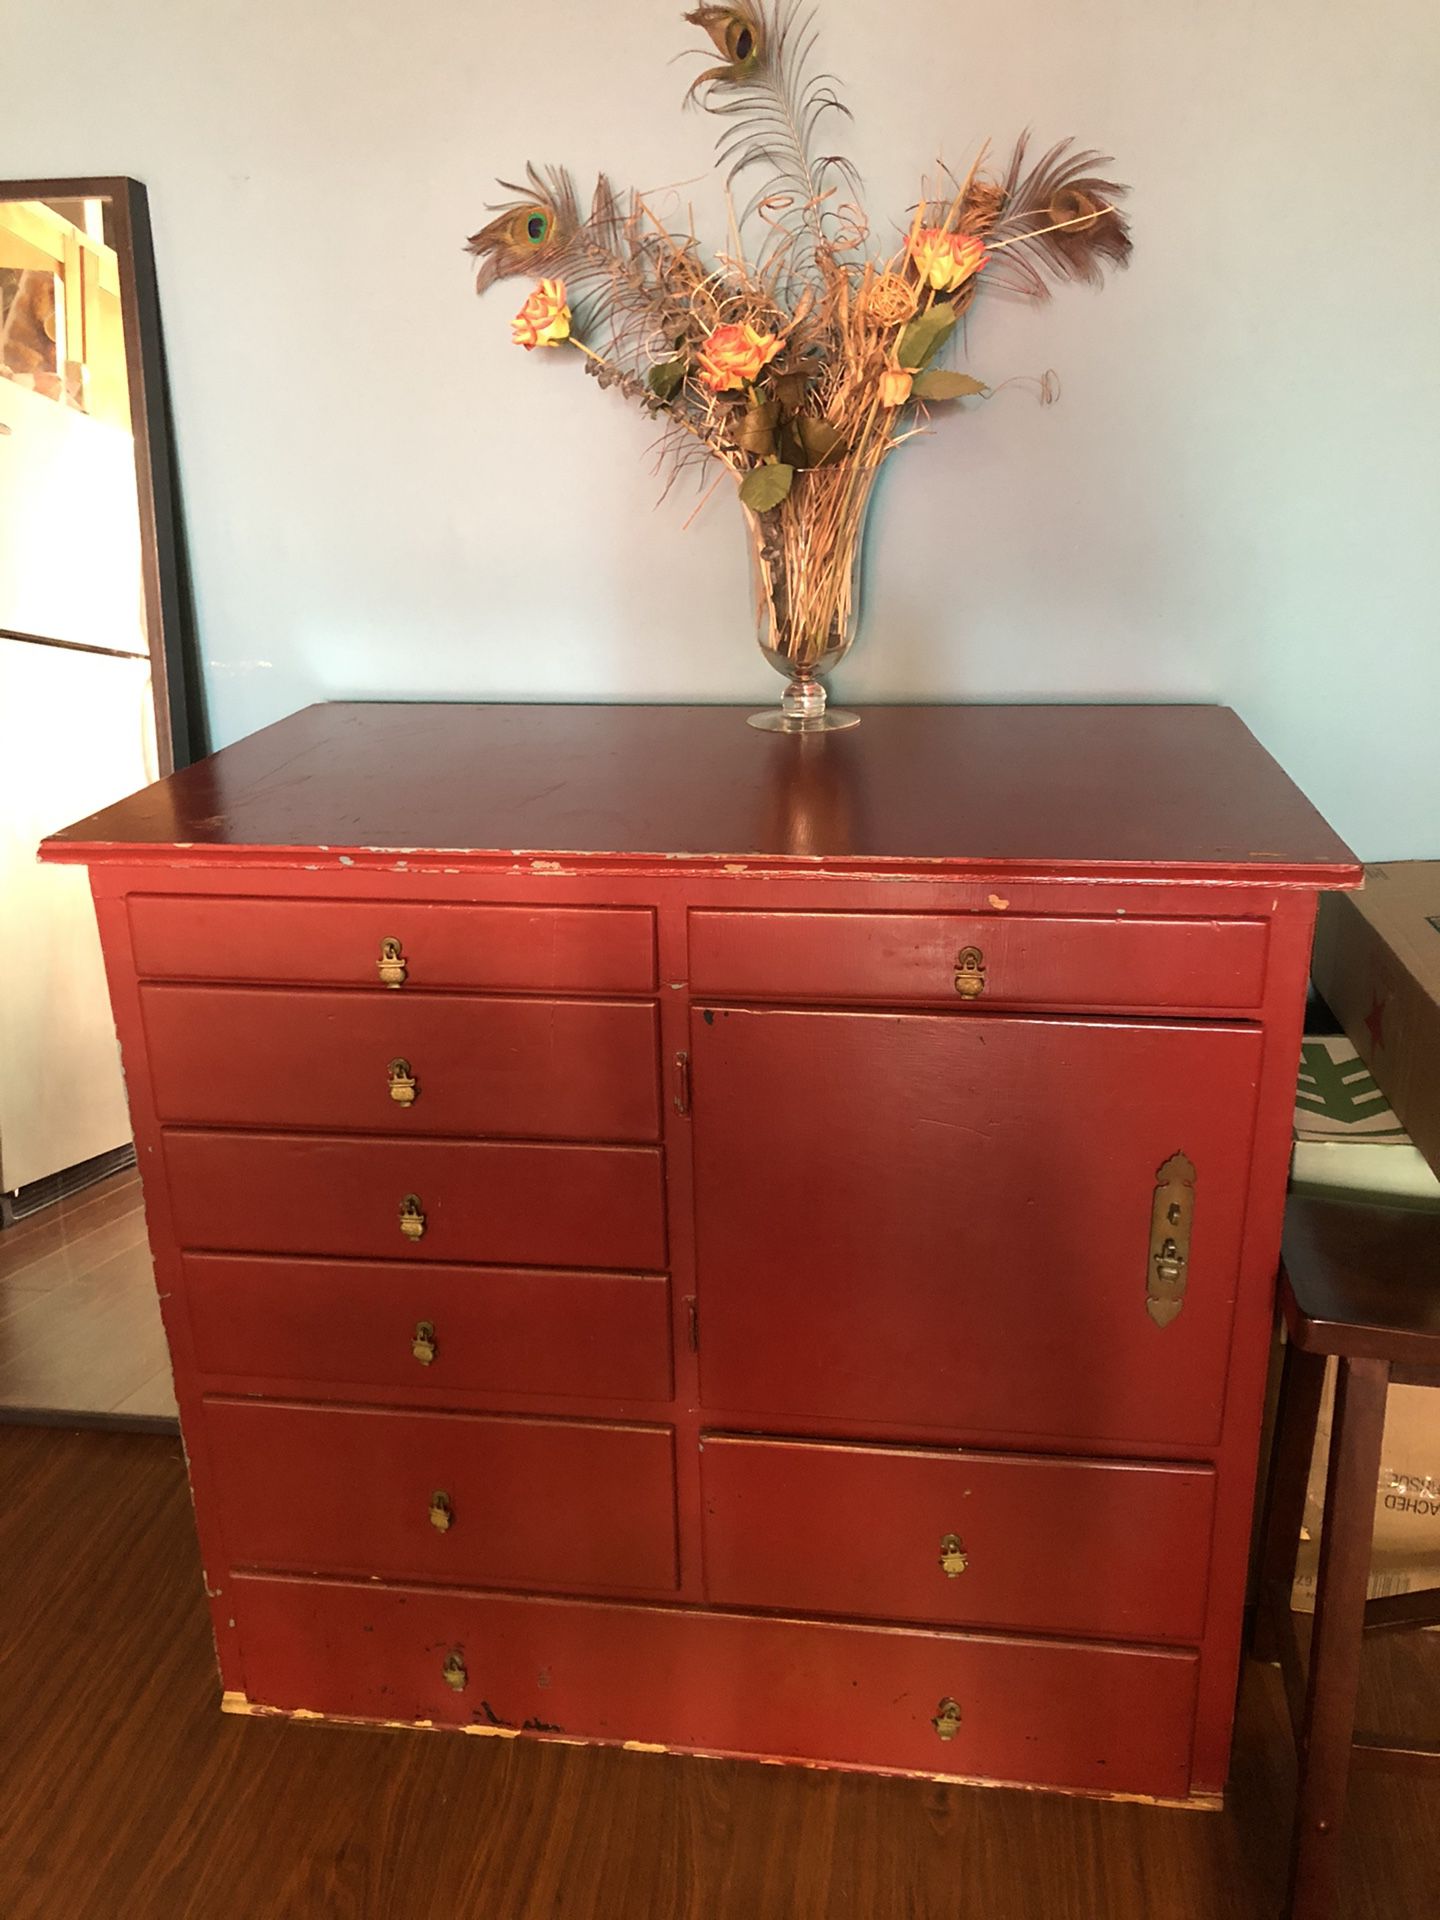 FREE- Beautiful antique red dresser. Moving. Must Go!